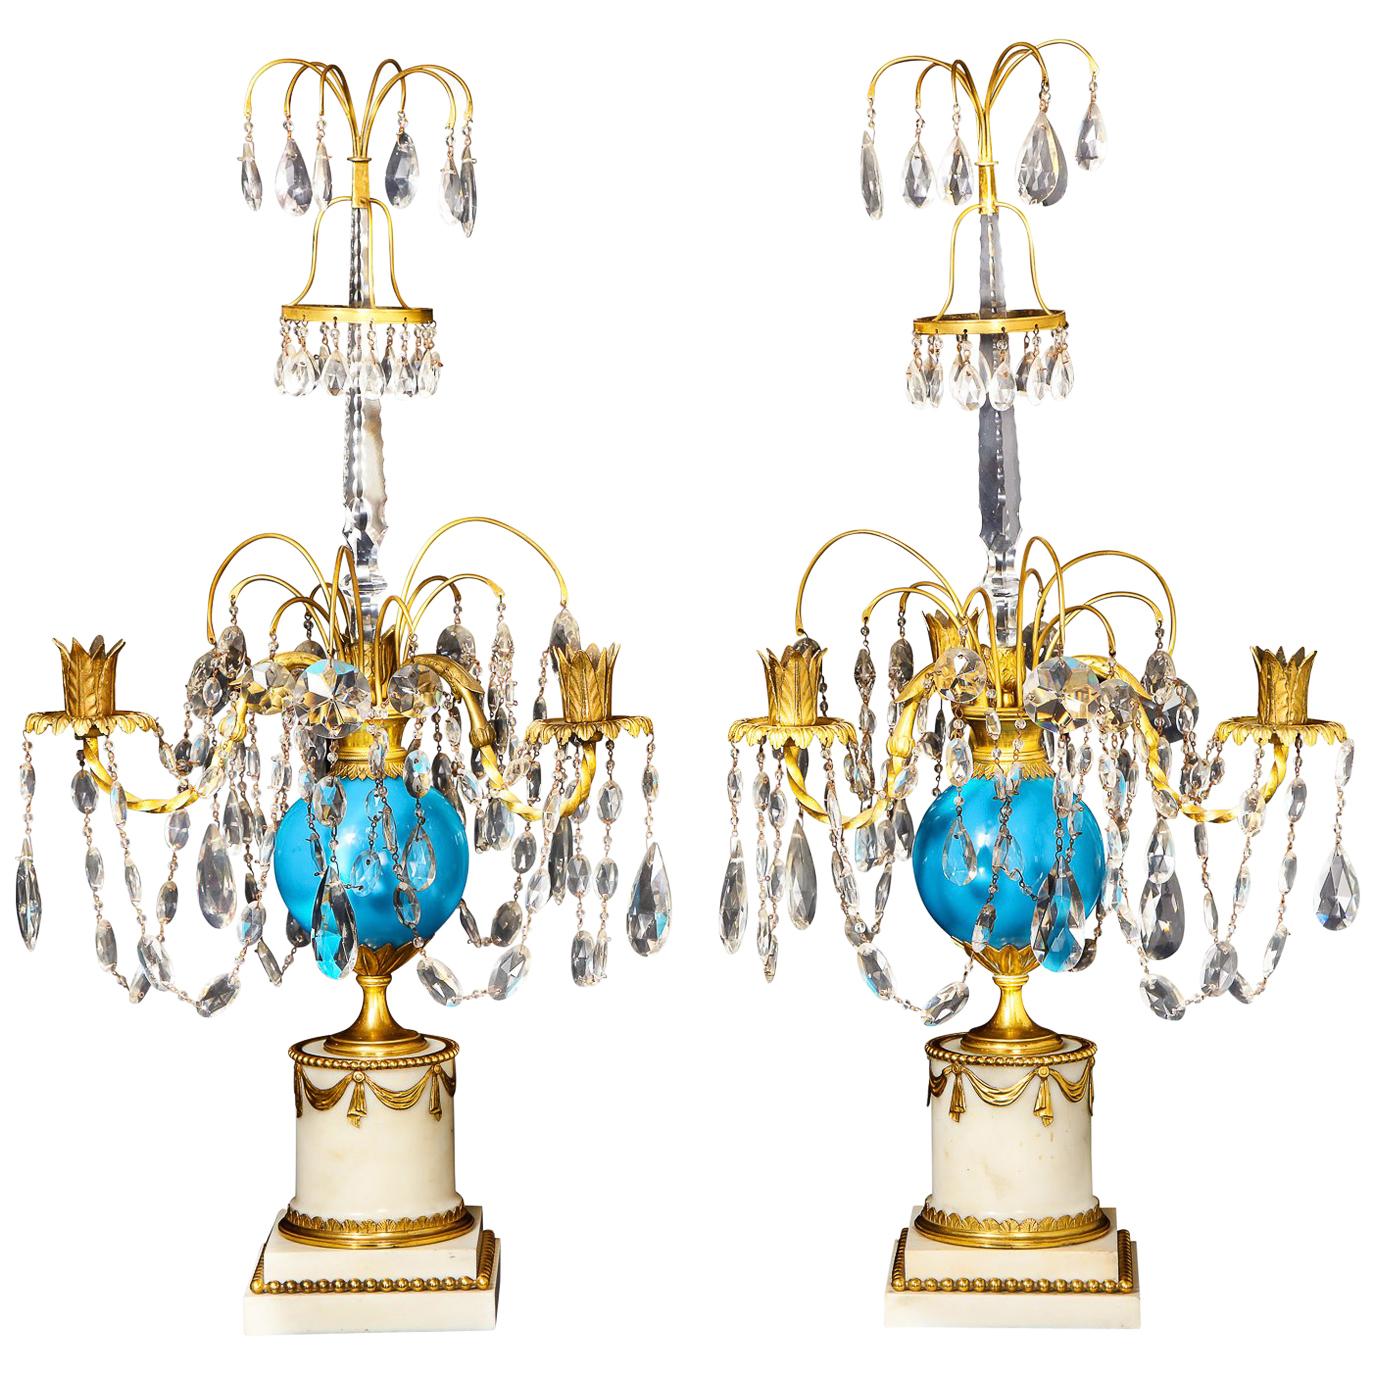 Pair of Antique Russian Neoclassical Gilt Bronze and Opaline Glass Candelabras